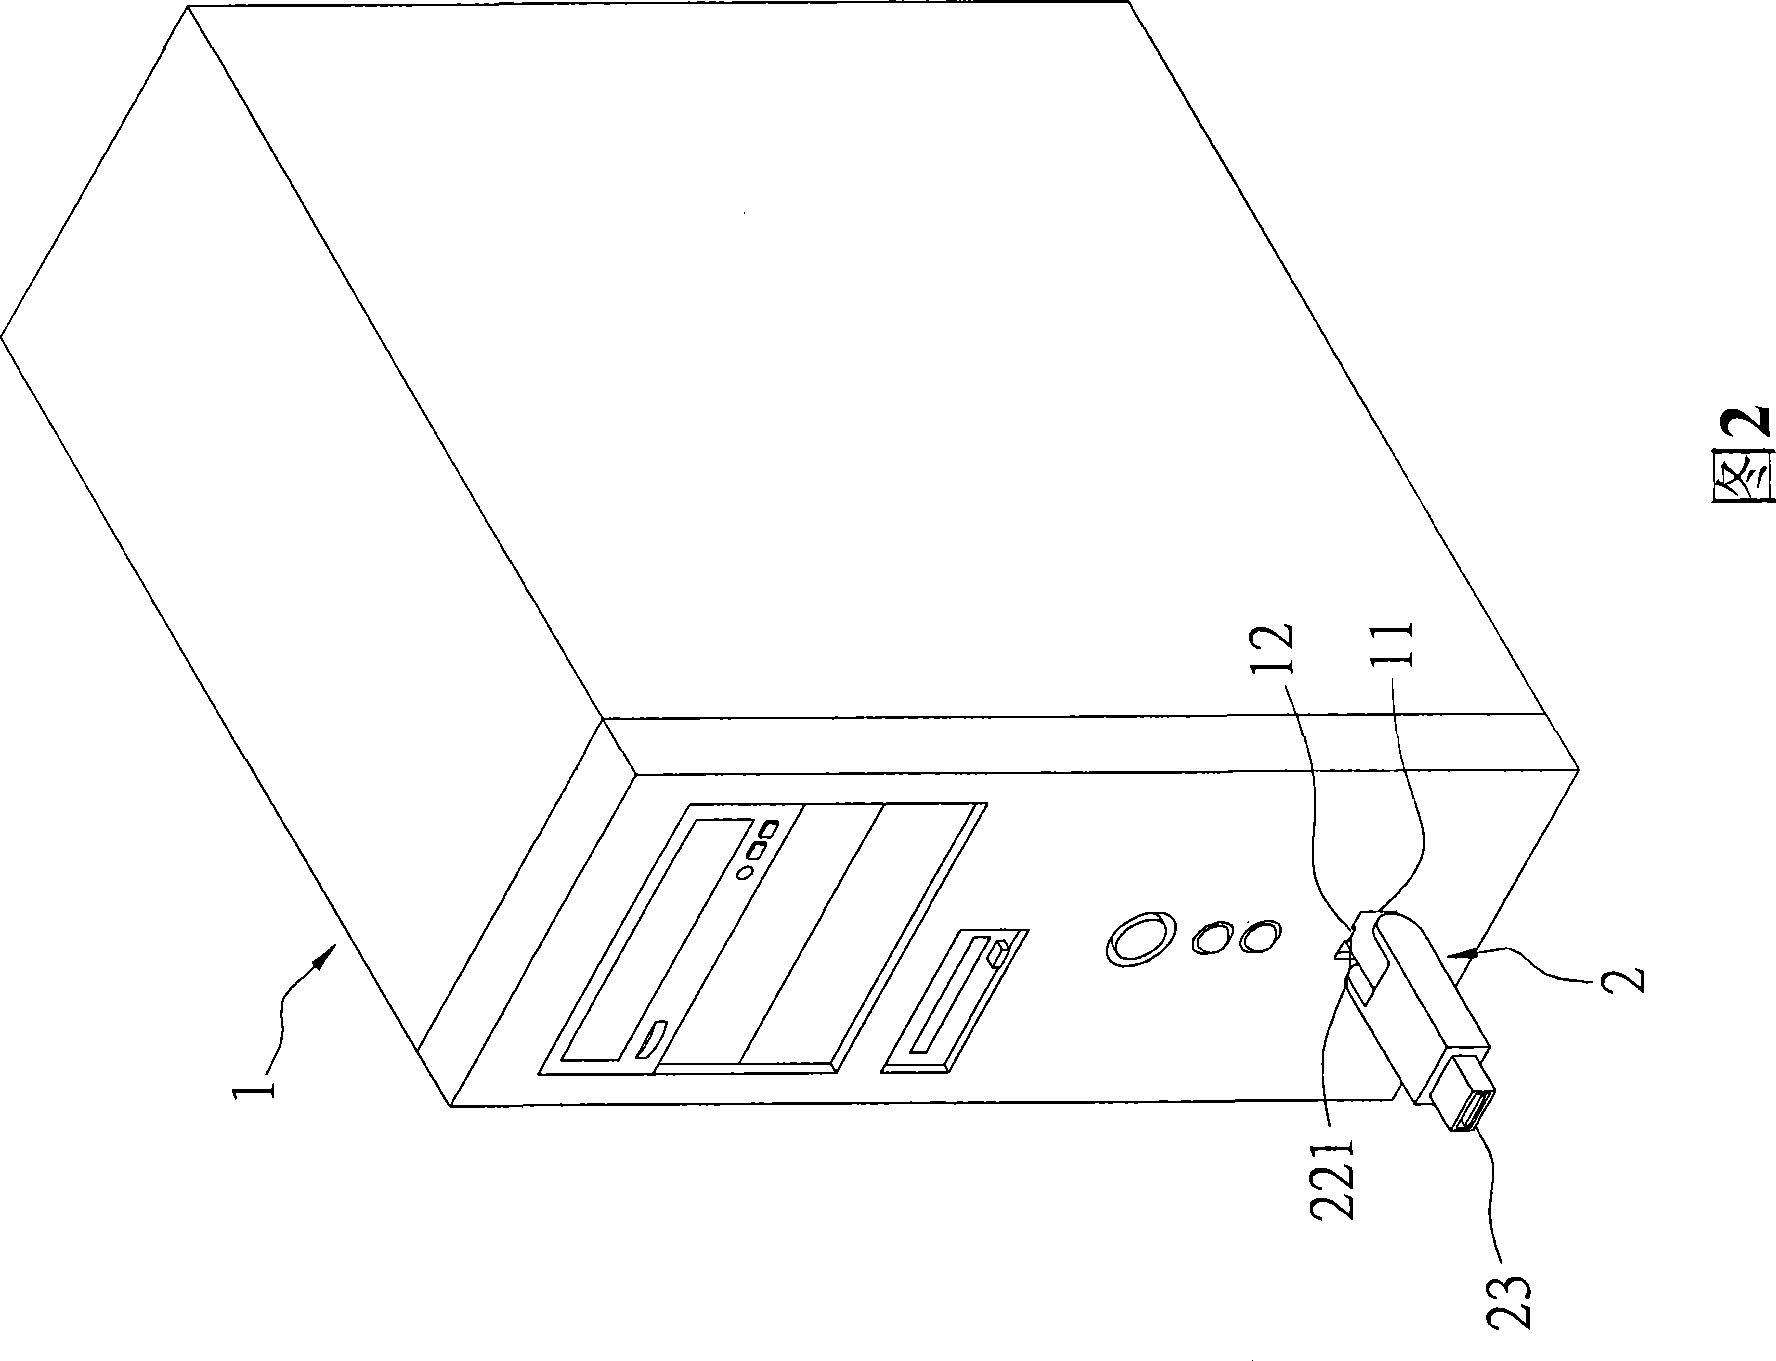 Connection wire apparatus for computer